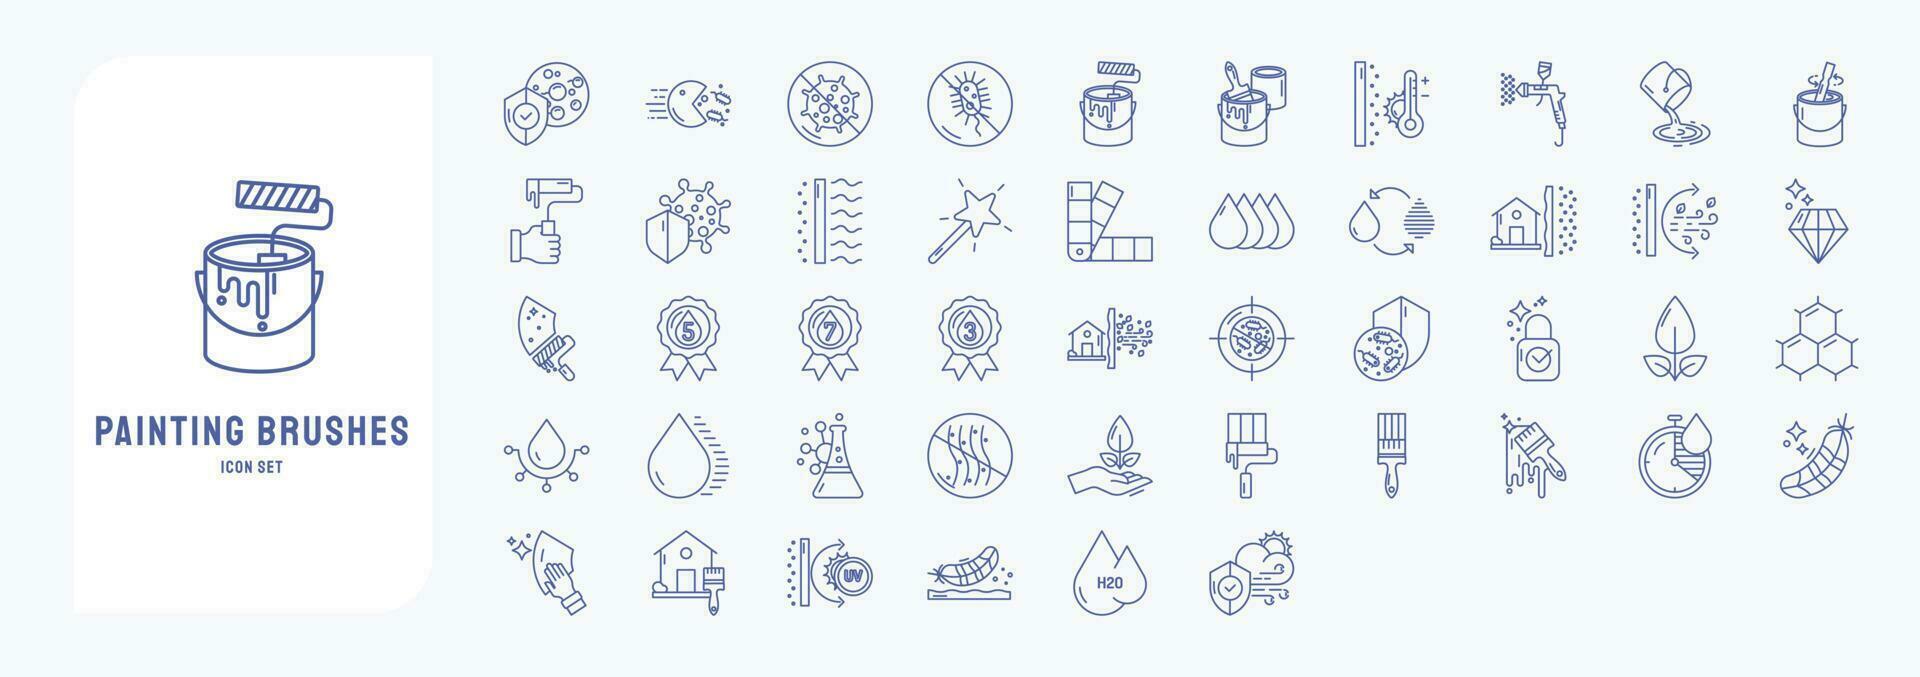 Collection of icons related to Wall Paint, including icons like Paint, wall Paint, color, and more vector